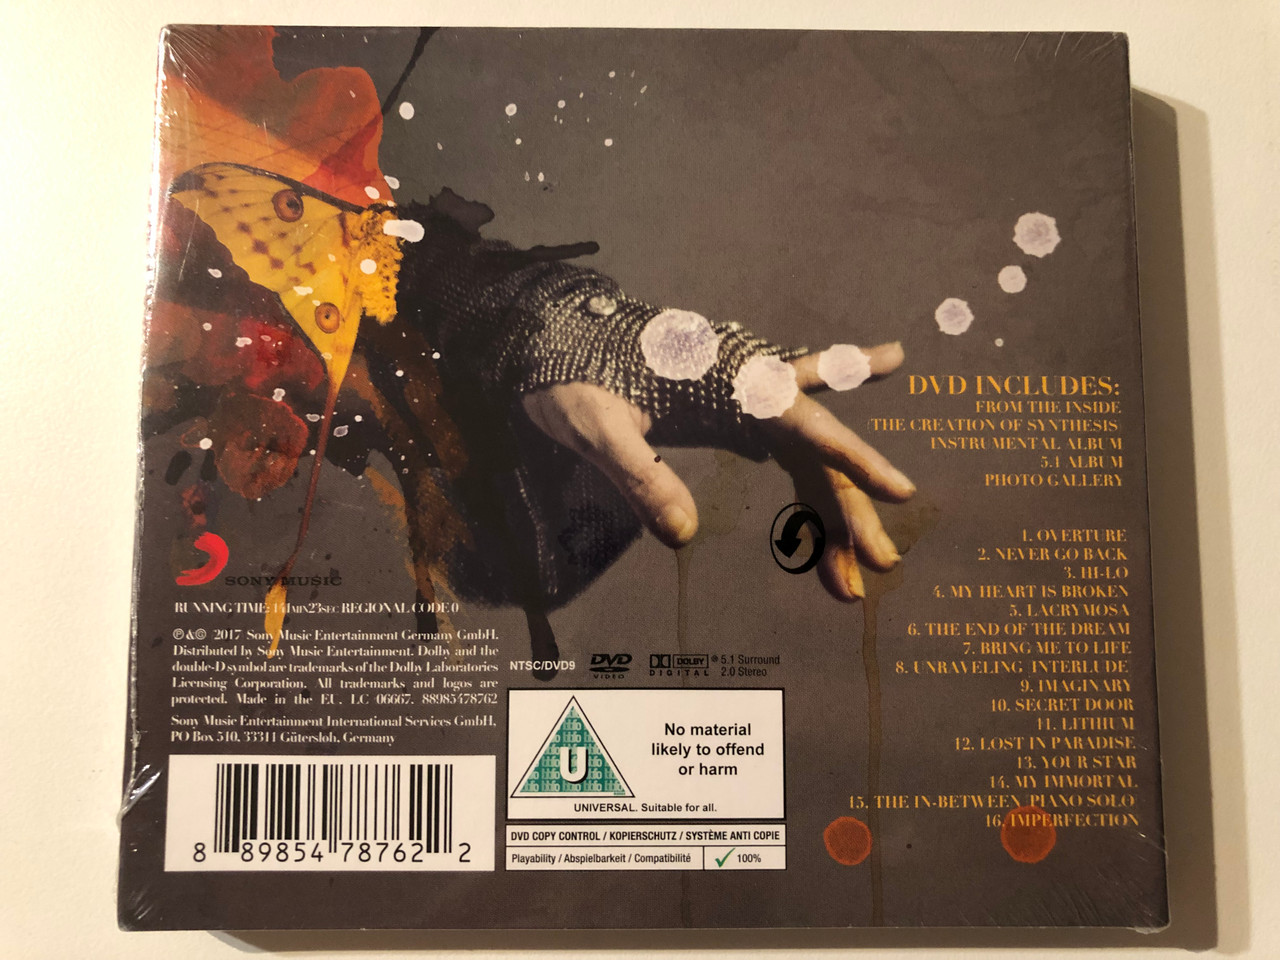 Evanescence – Synthesis / Deluxe Version: CD with 16 tracks, DVD with From  The Inside (The Creation Of Synthesis), Documentary, Instrumental album,  piano & orchestra score and 5.1 album mix / Sony